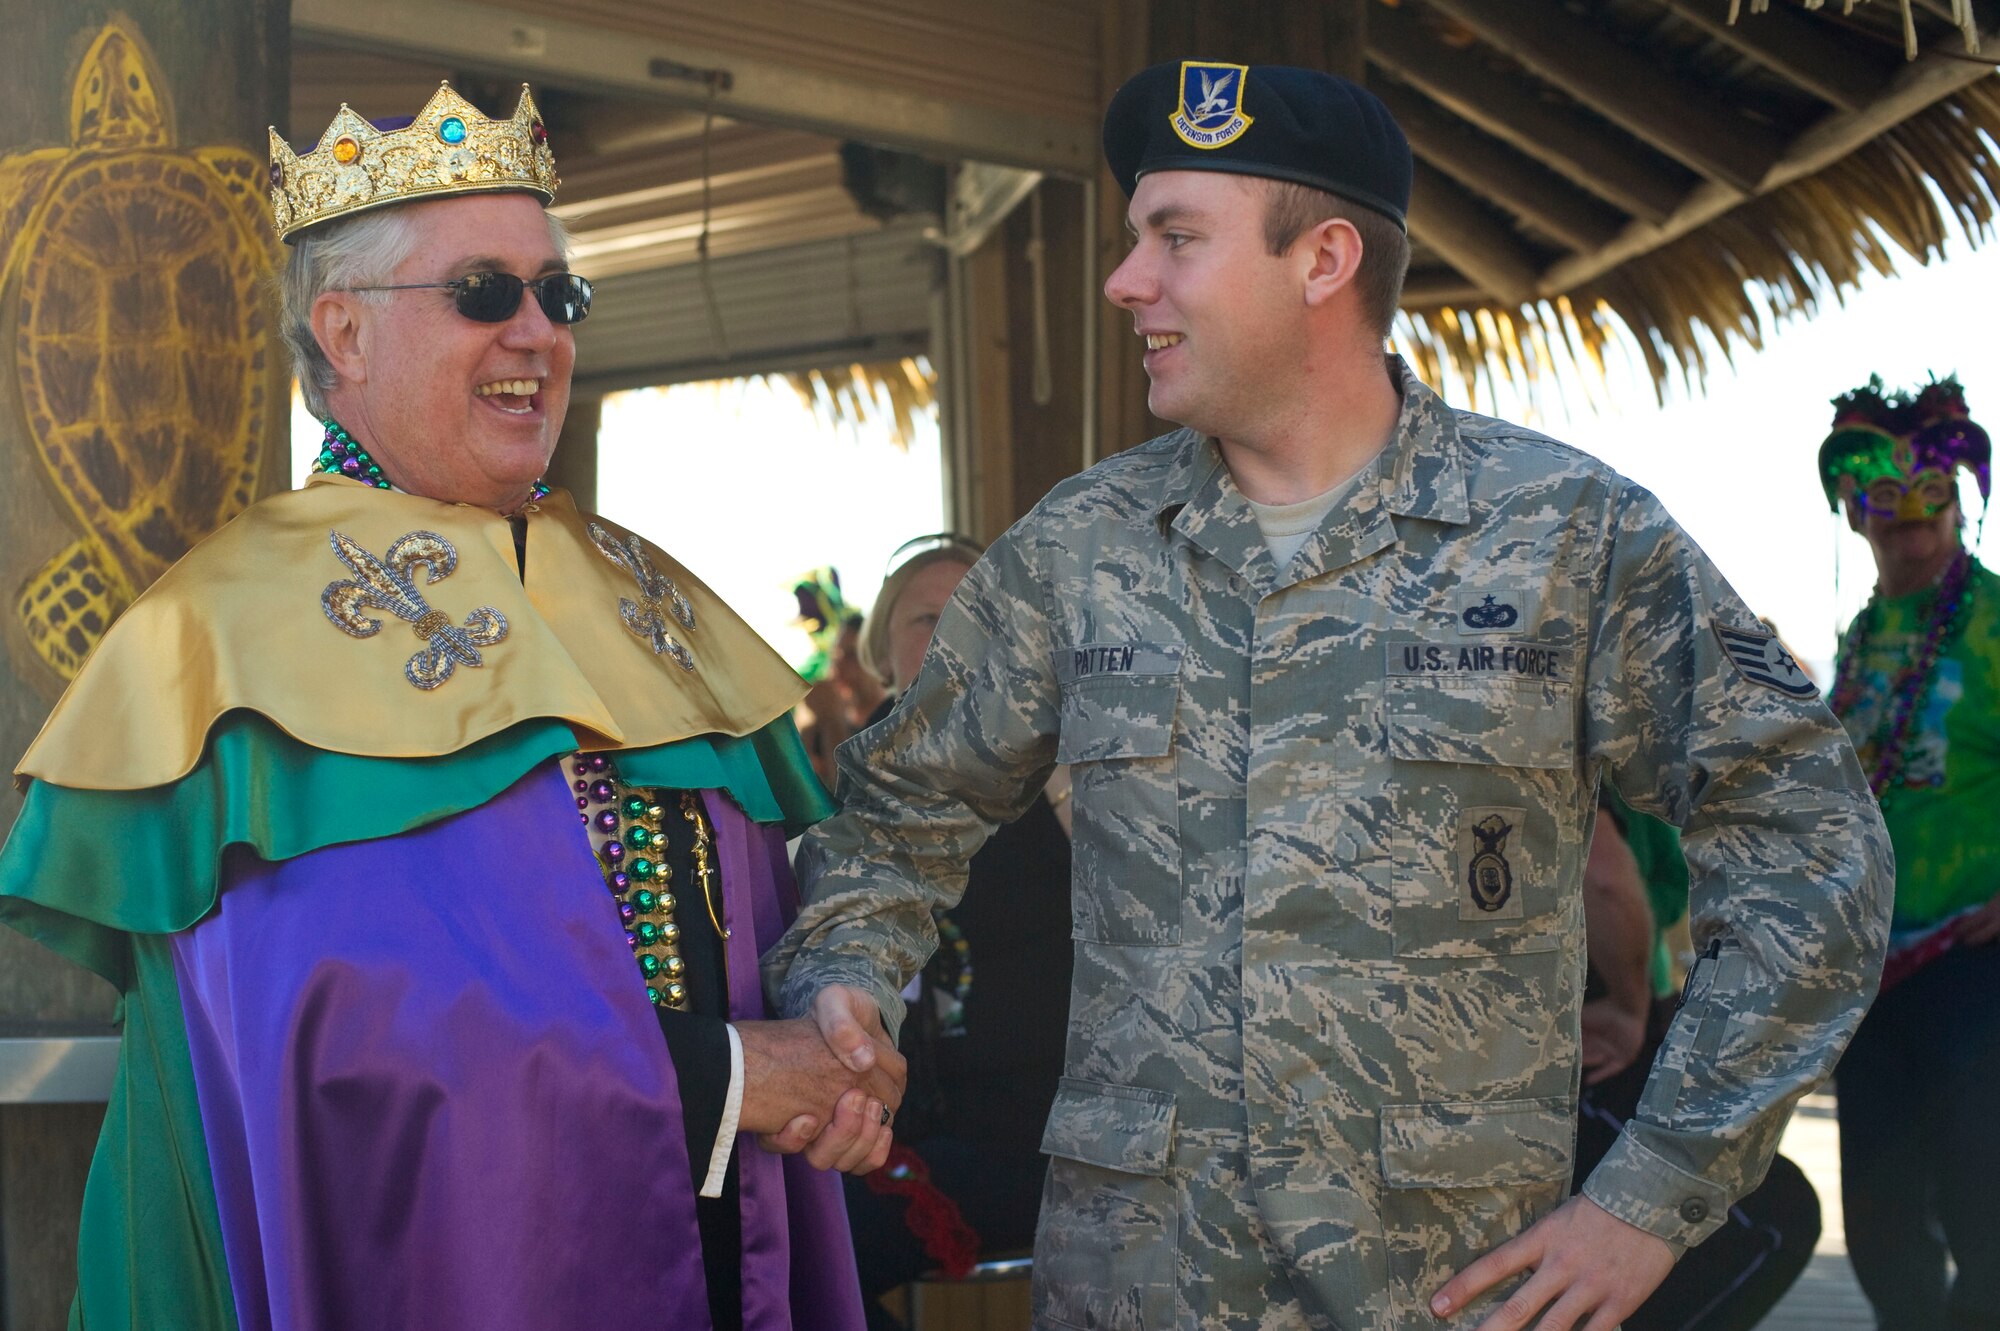 Peter Peterzen, king of the 2013 Navarre Krewe of Jesters, left, shakes hands with Staff Sgt. Alex Patten, 1st Special Operations Security Forces Squadron, right, after a mardi gras parade at Navarre Beach, Fla., Feb. 2, 2013. Patten drove a High Mobility Multipurpose Wheeled Vehicle as part of Hurlburt Field's entry in the parade. (U.S. Air Force photo / Tech. Sgt. Vanessa Valentine)